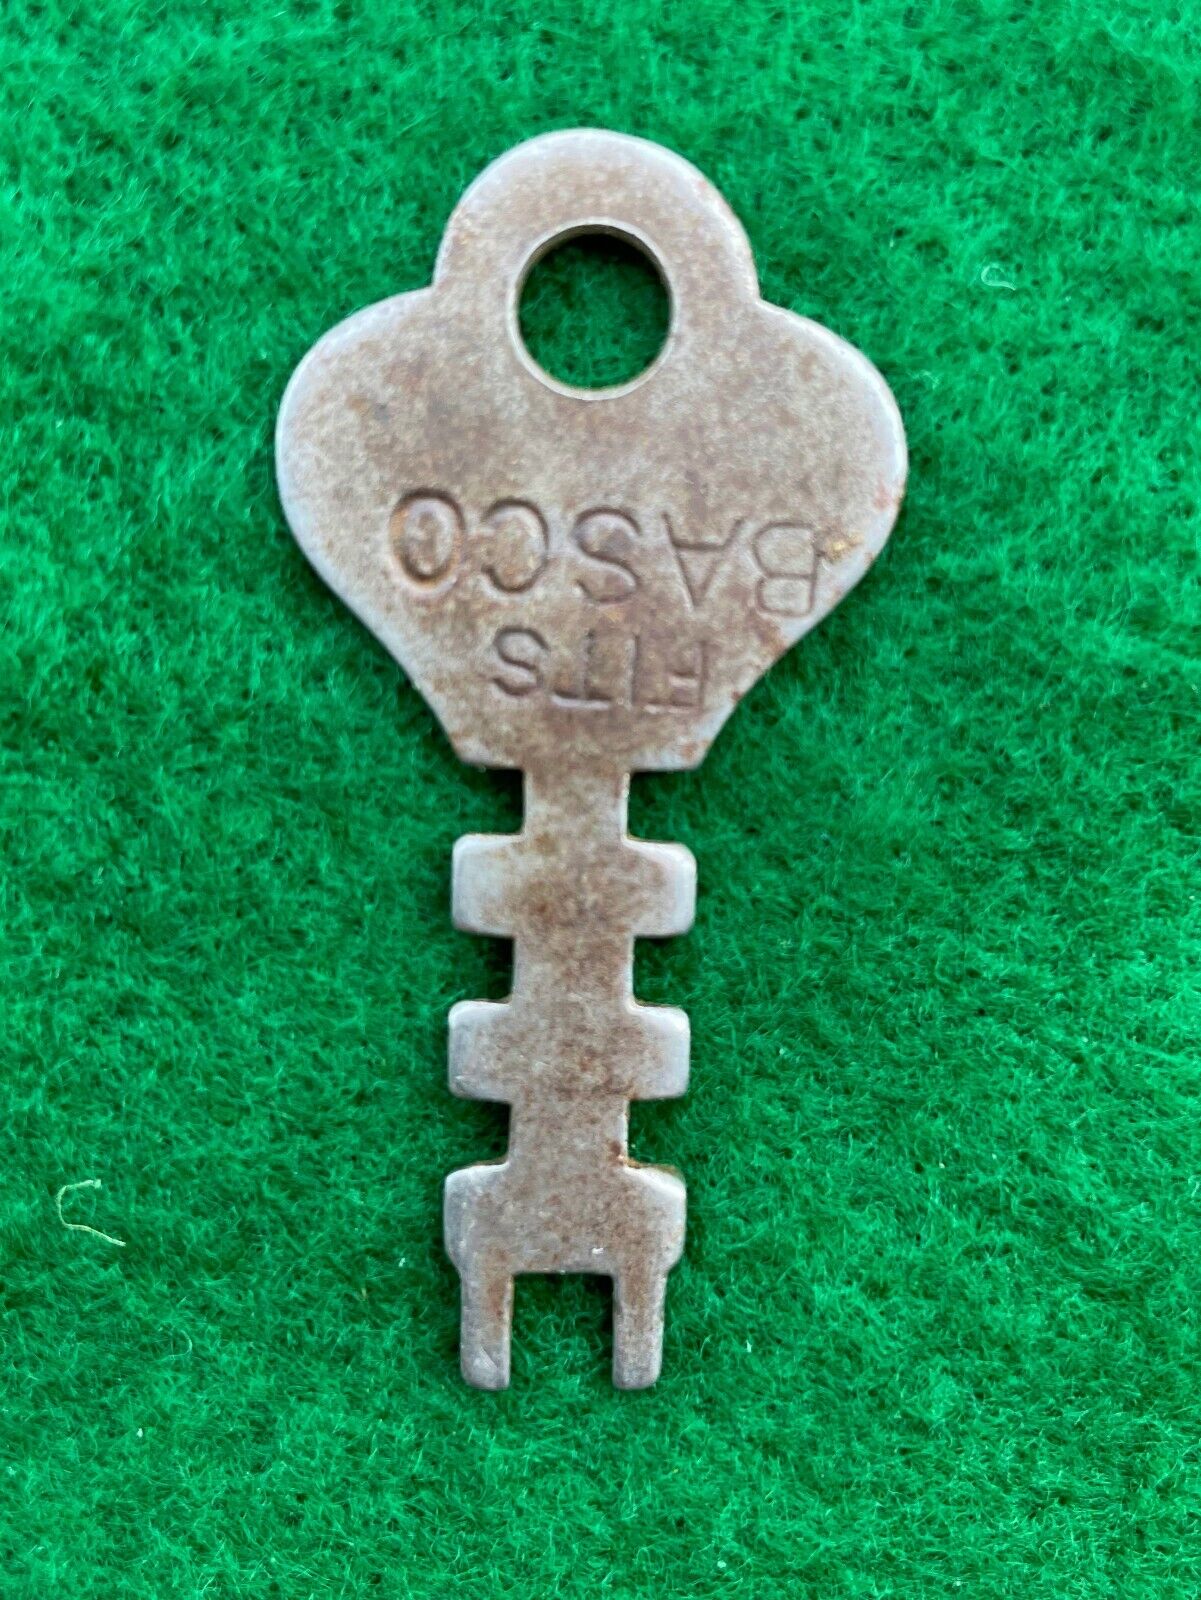 Vintage or Antique Early Automobile Key Stamped Fits BASCO